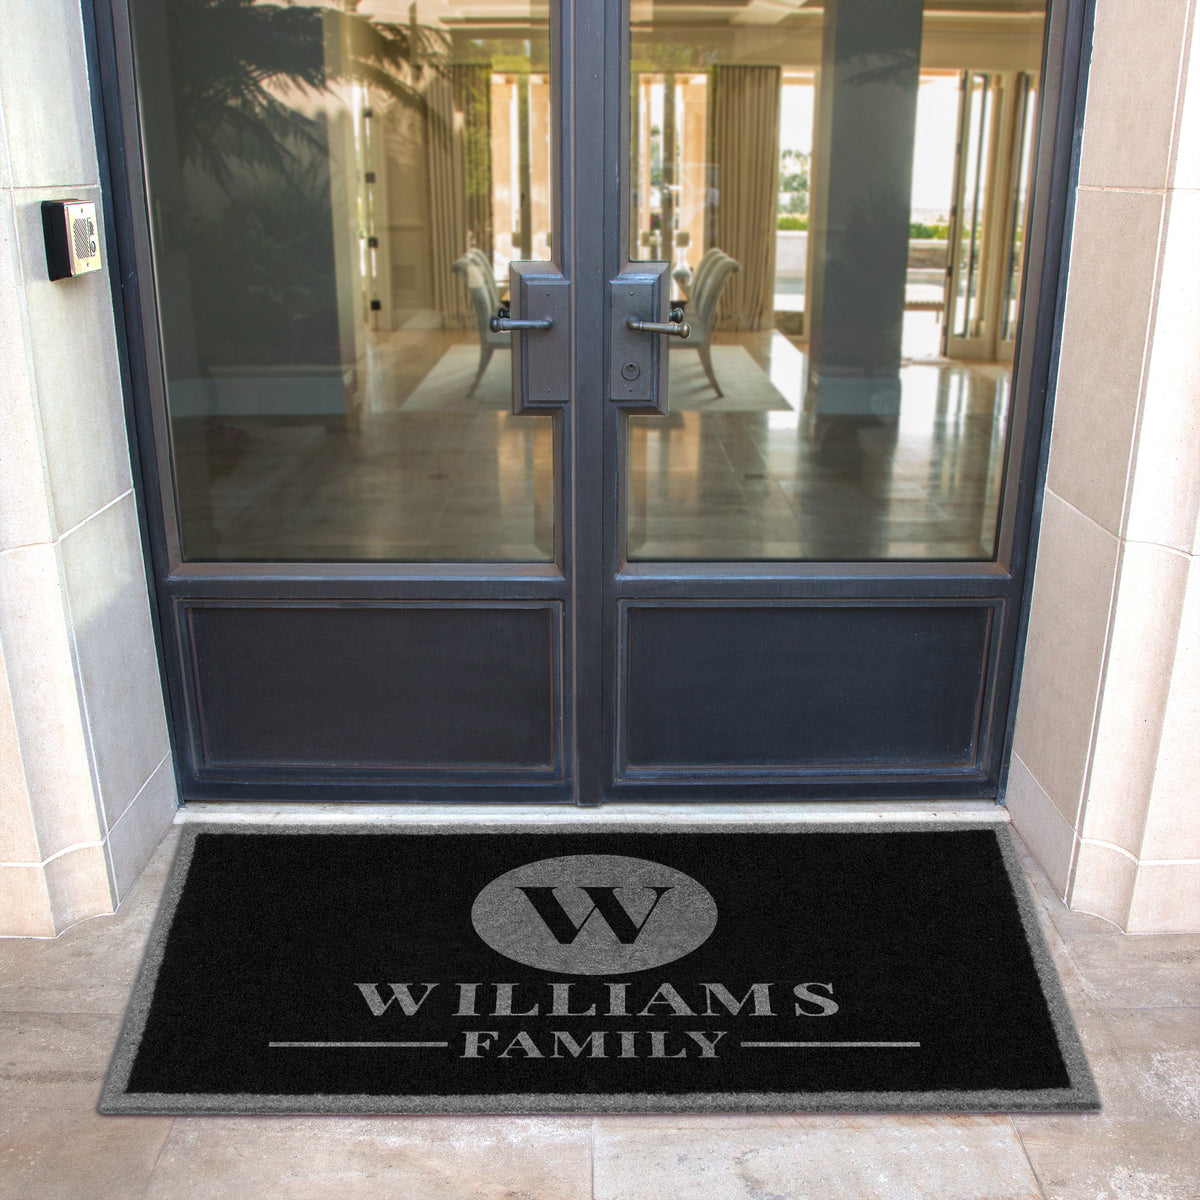 Infinity Custom Mats™ All-Weather Personalized Doormat - STYLE: CIRCLE COLOR: BLACK / GREY - rugsthatfit.com